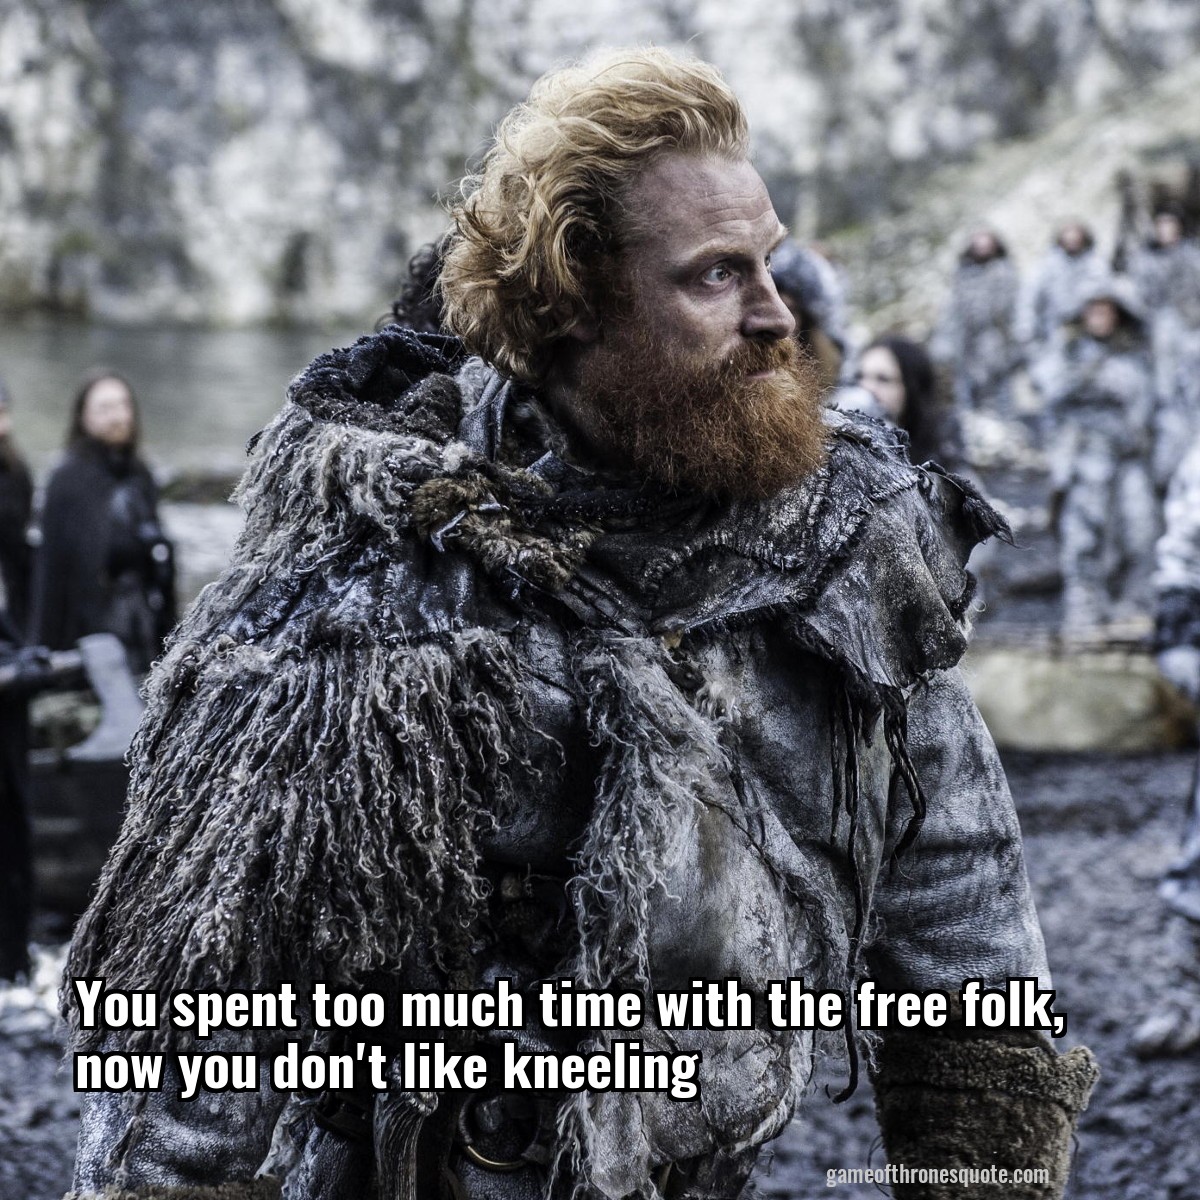 You spent too much time with the free folk, now you don't like kneeling